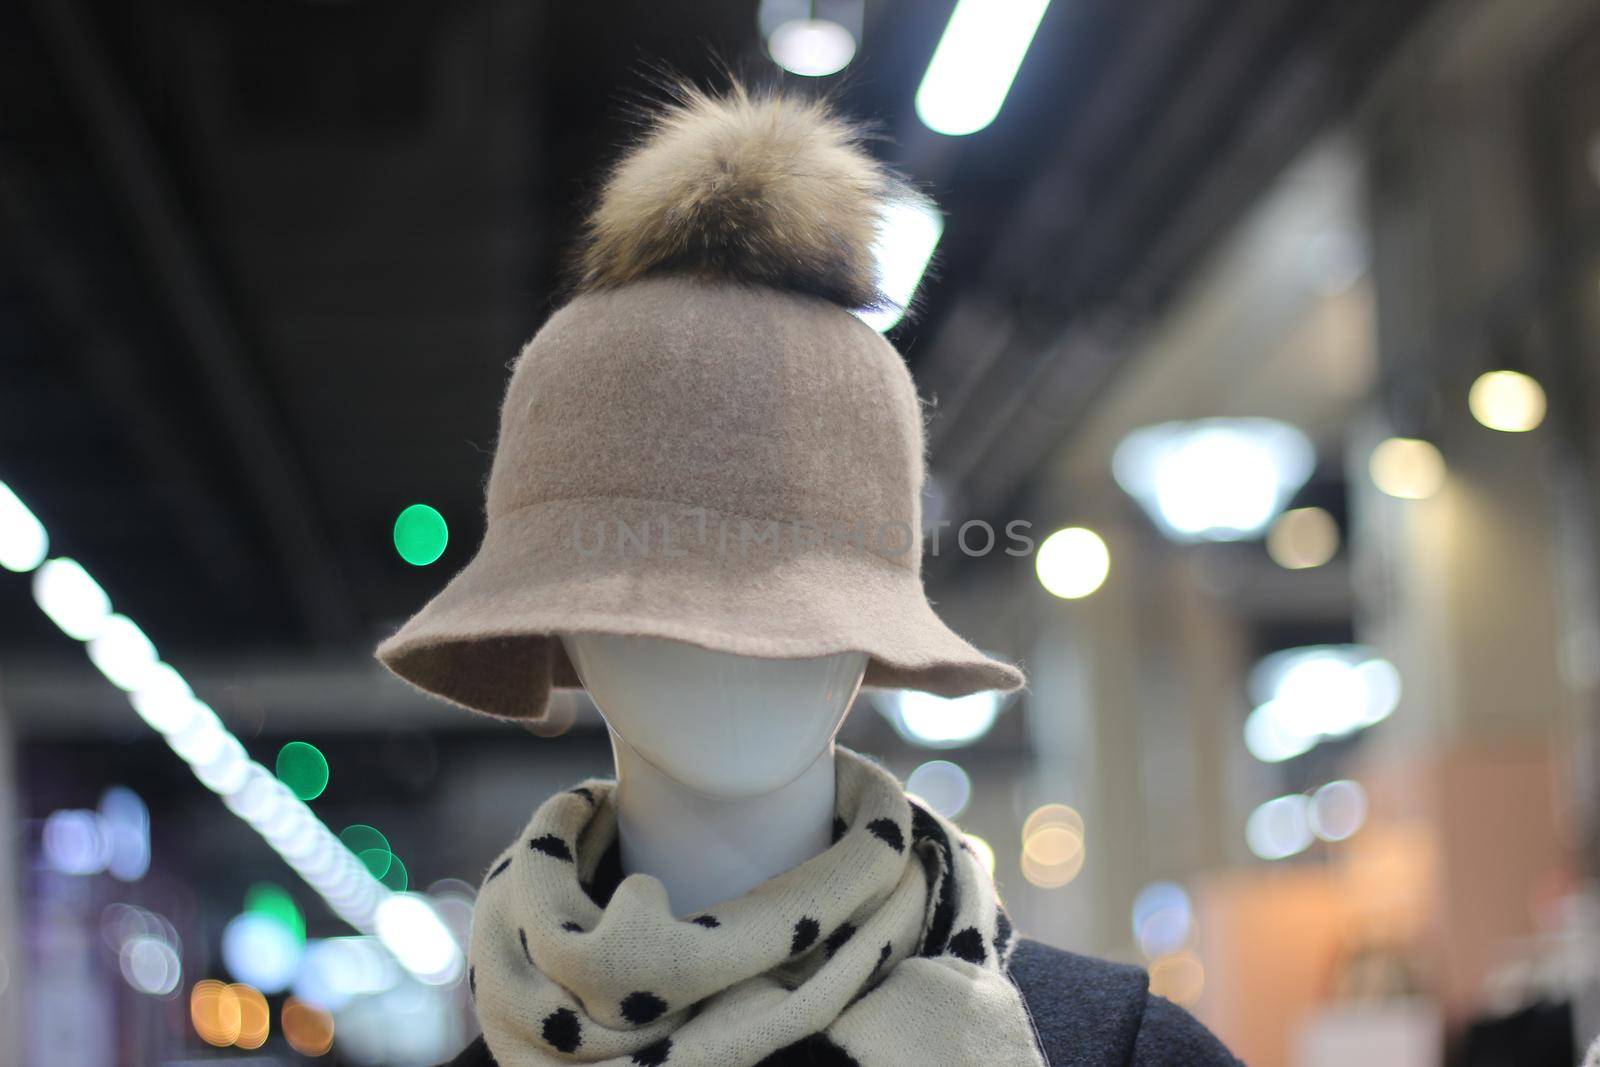 Woolen white hat on a mannequin head displayed in a mall by Photochowk